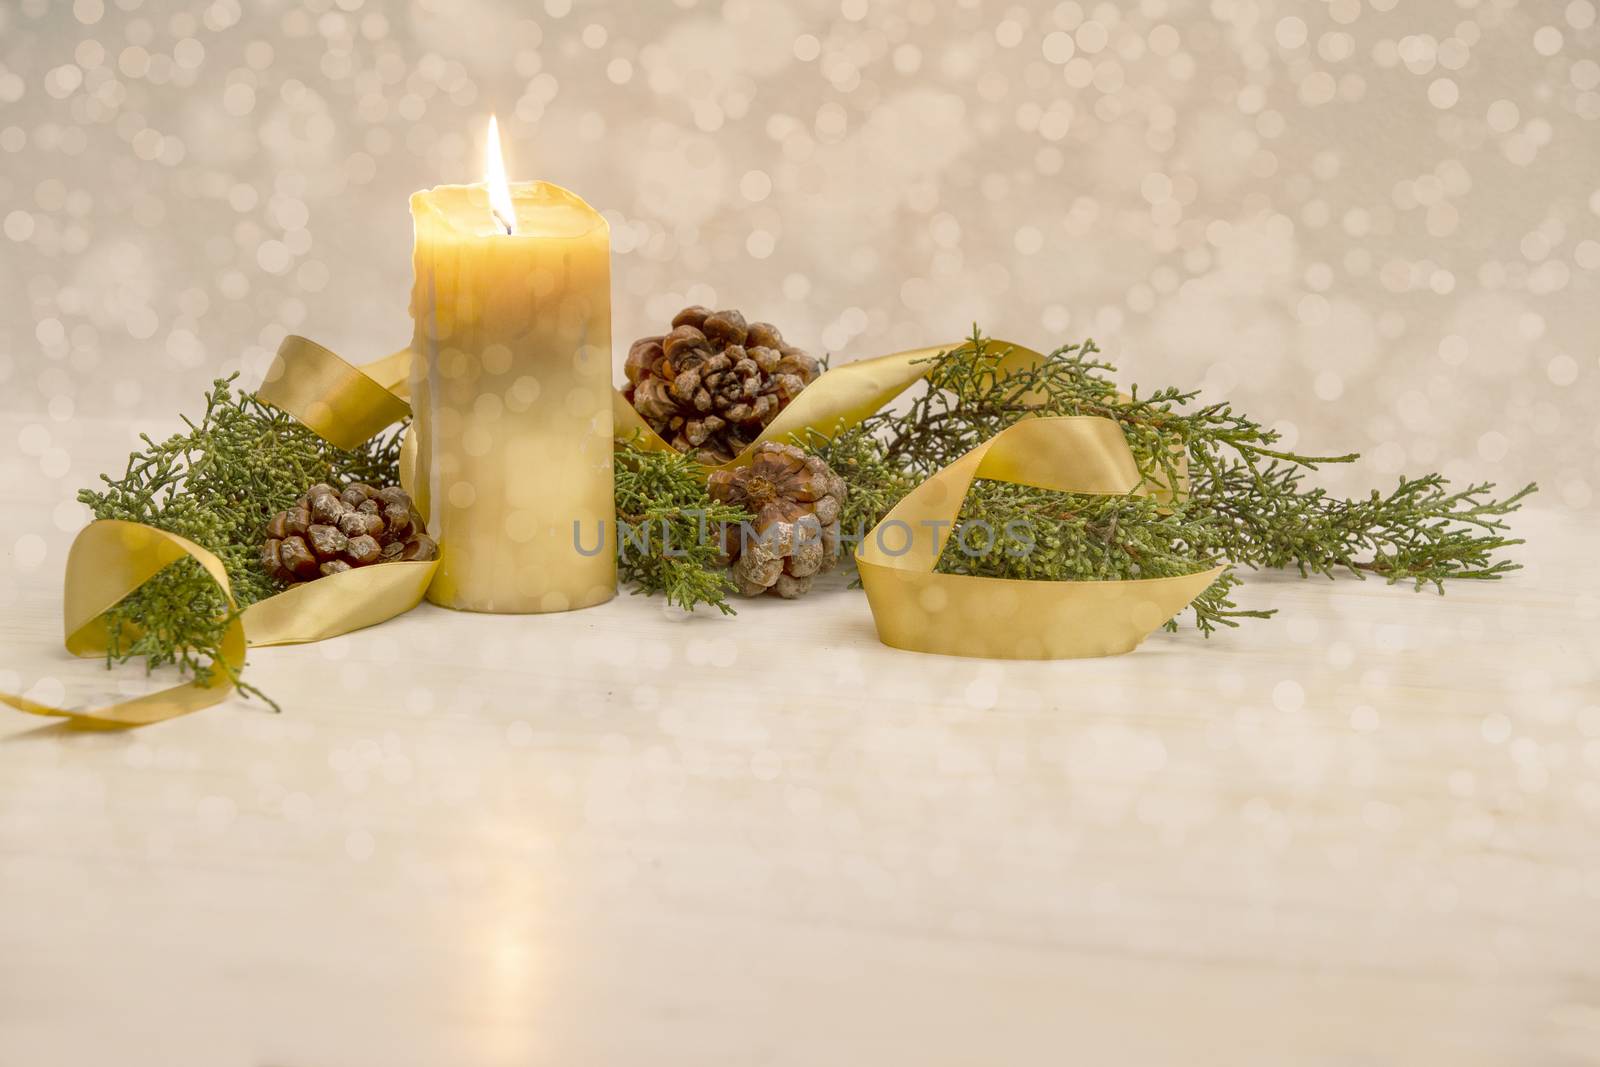 Christmas copy space with a lit yellow candle, pine branches, golden satin ribbon and natural pine cones on a light patterned background by robbyfontanesi